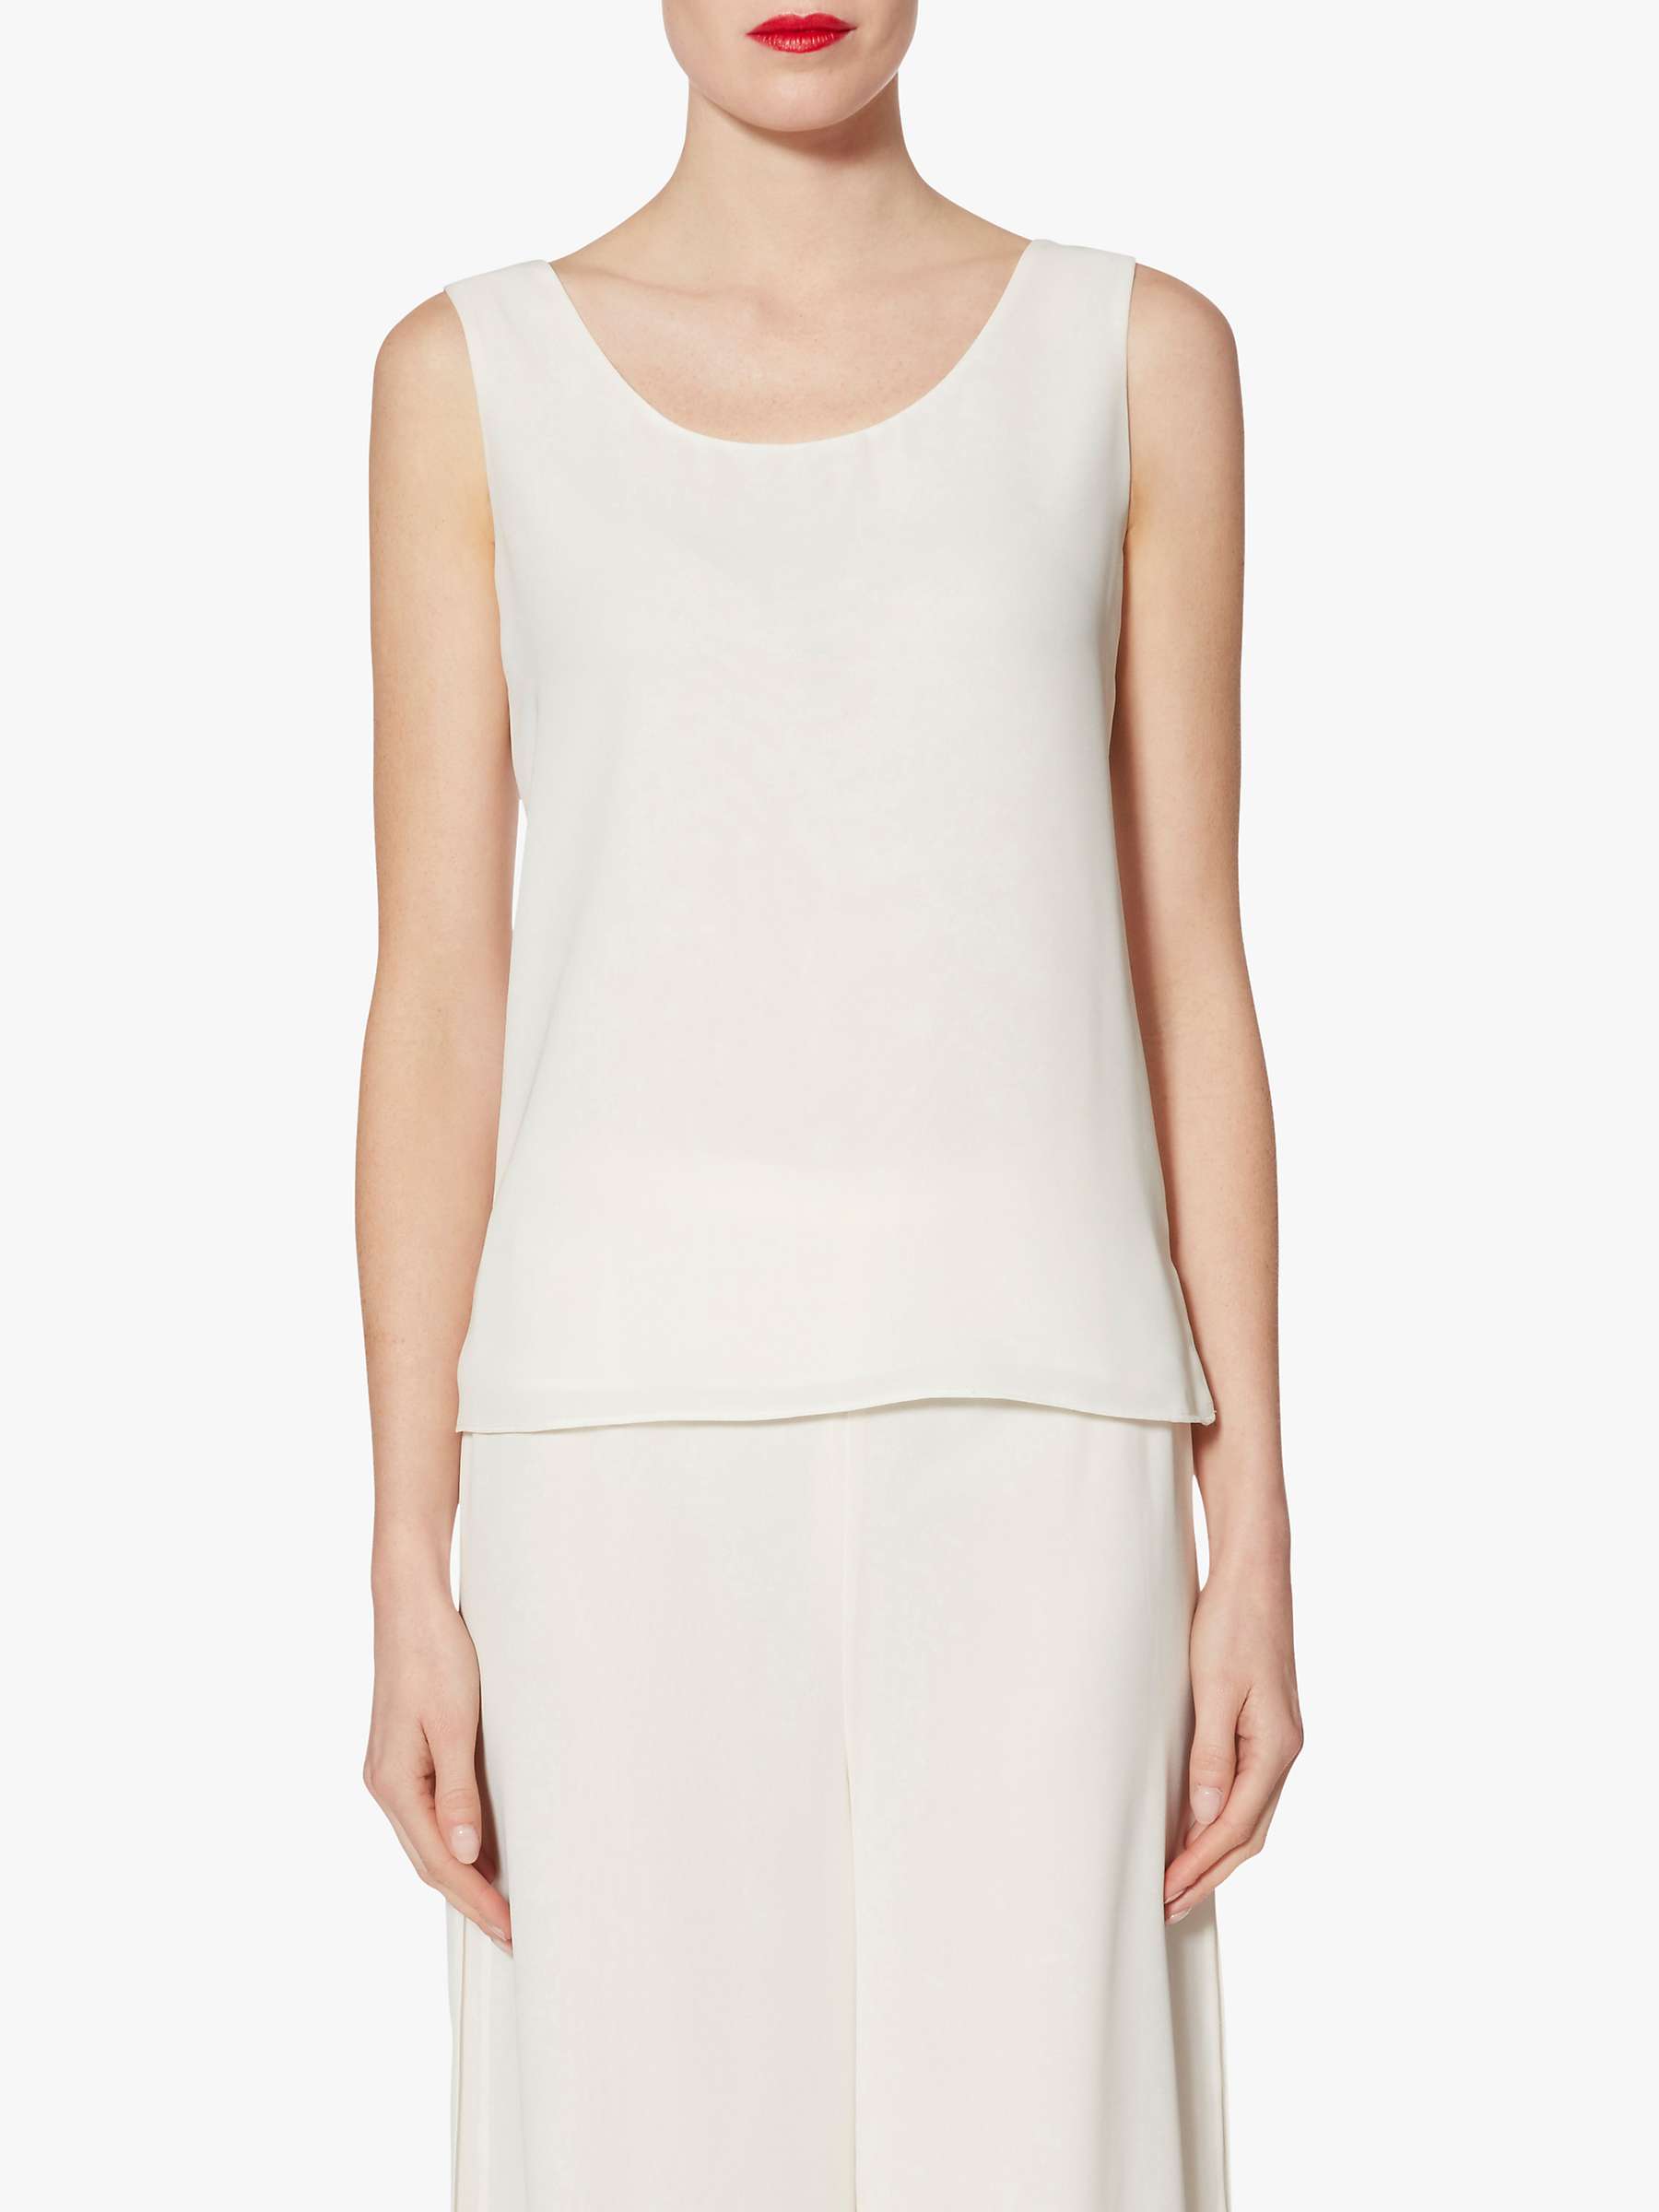 Buy Gina Bacconi Double Layer Chiffon Camisole, Chalk Online at johnlewis.com